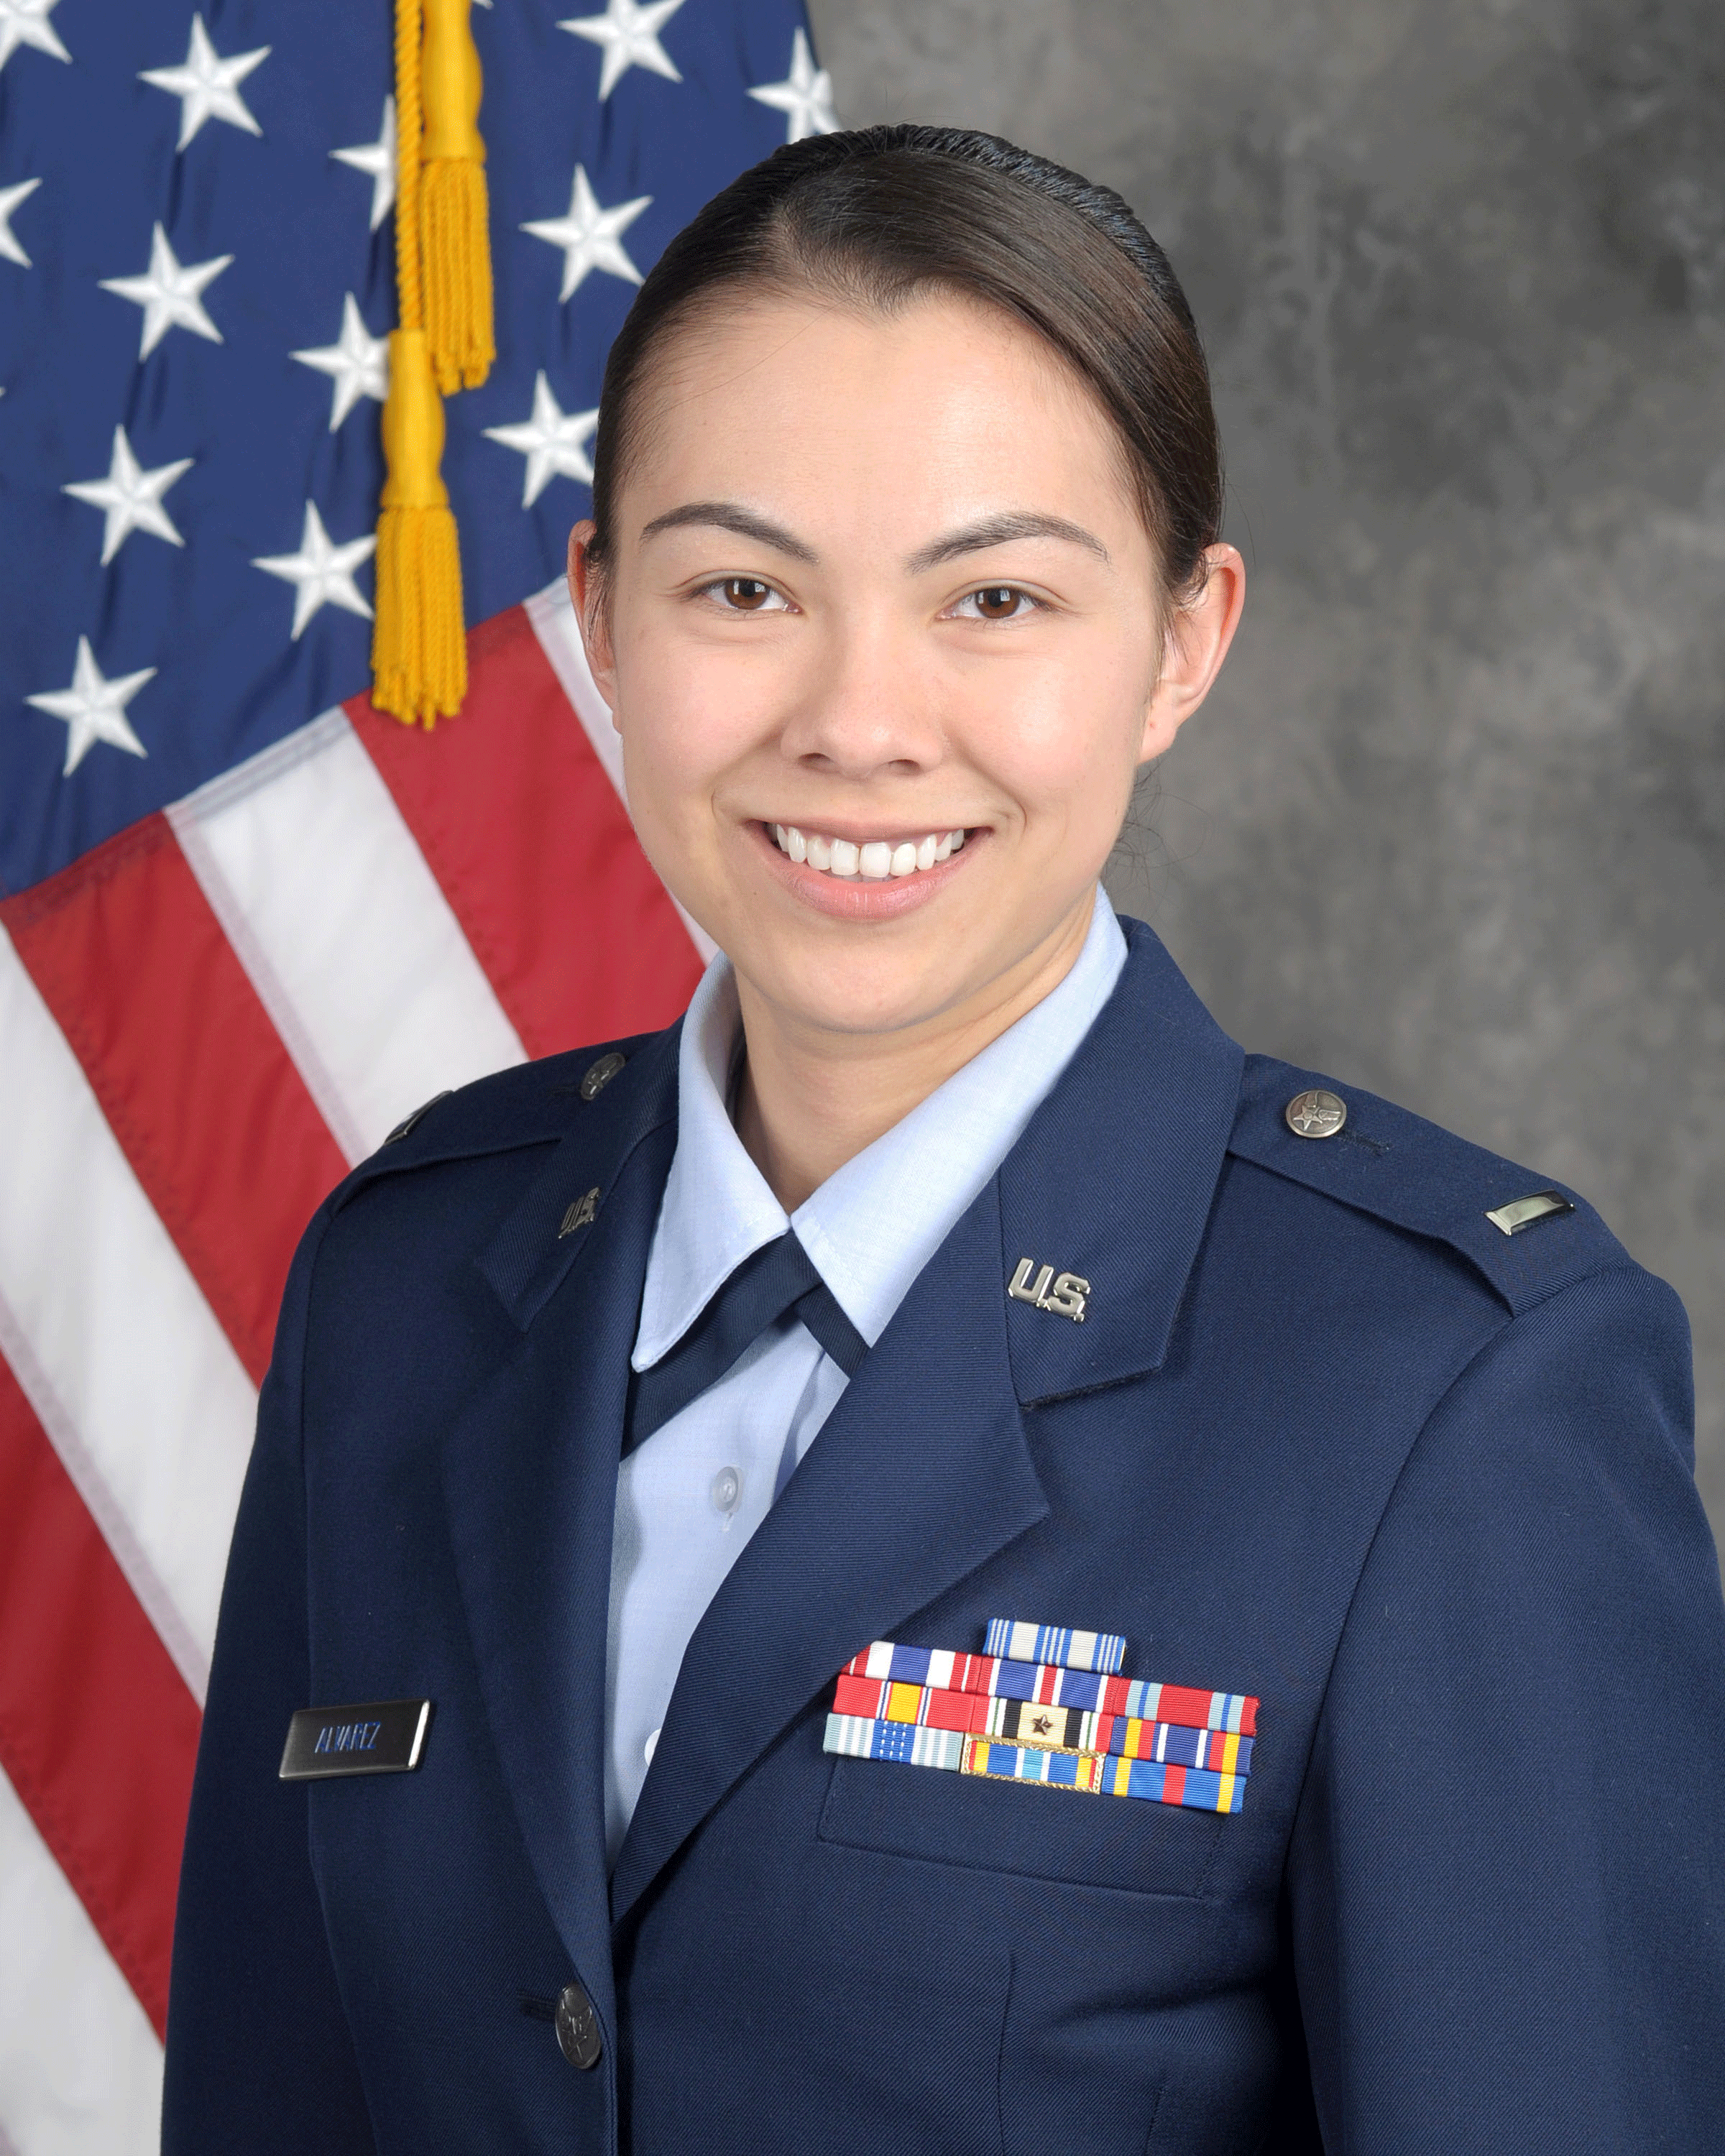 Oklahoma State University student 1st Lt. Melanie Alvarez recently was awarded the Great Plains-Rocky Mountain Regional Distinguished Young AFCEAN award for her exceptional performance in the Armed Forces Communications and Electronics Association.